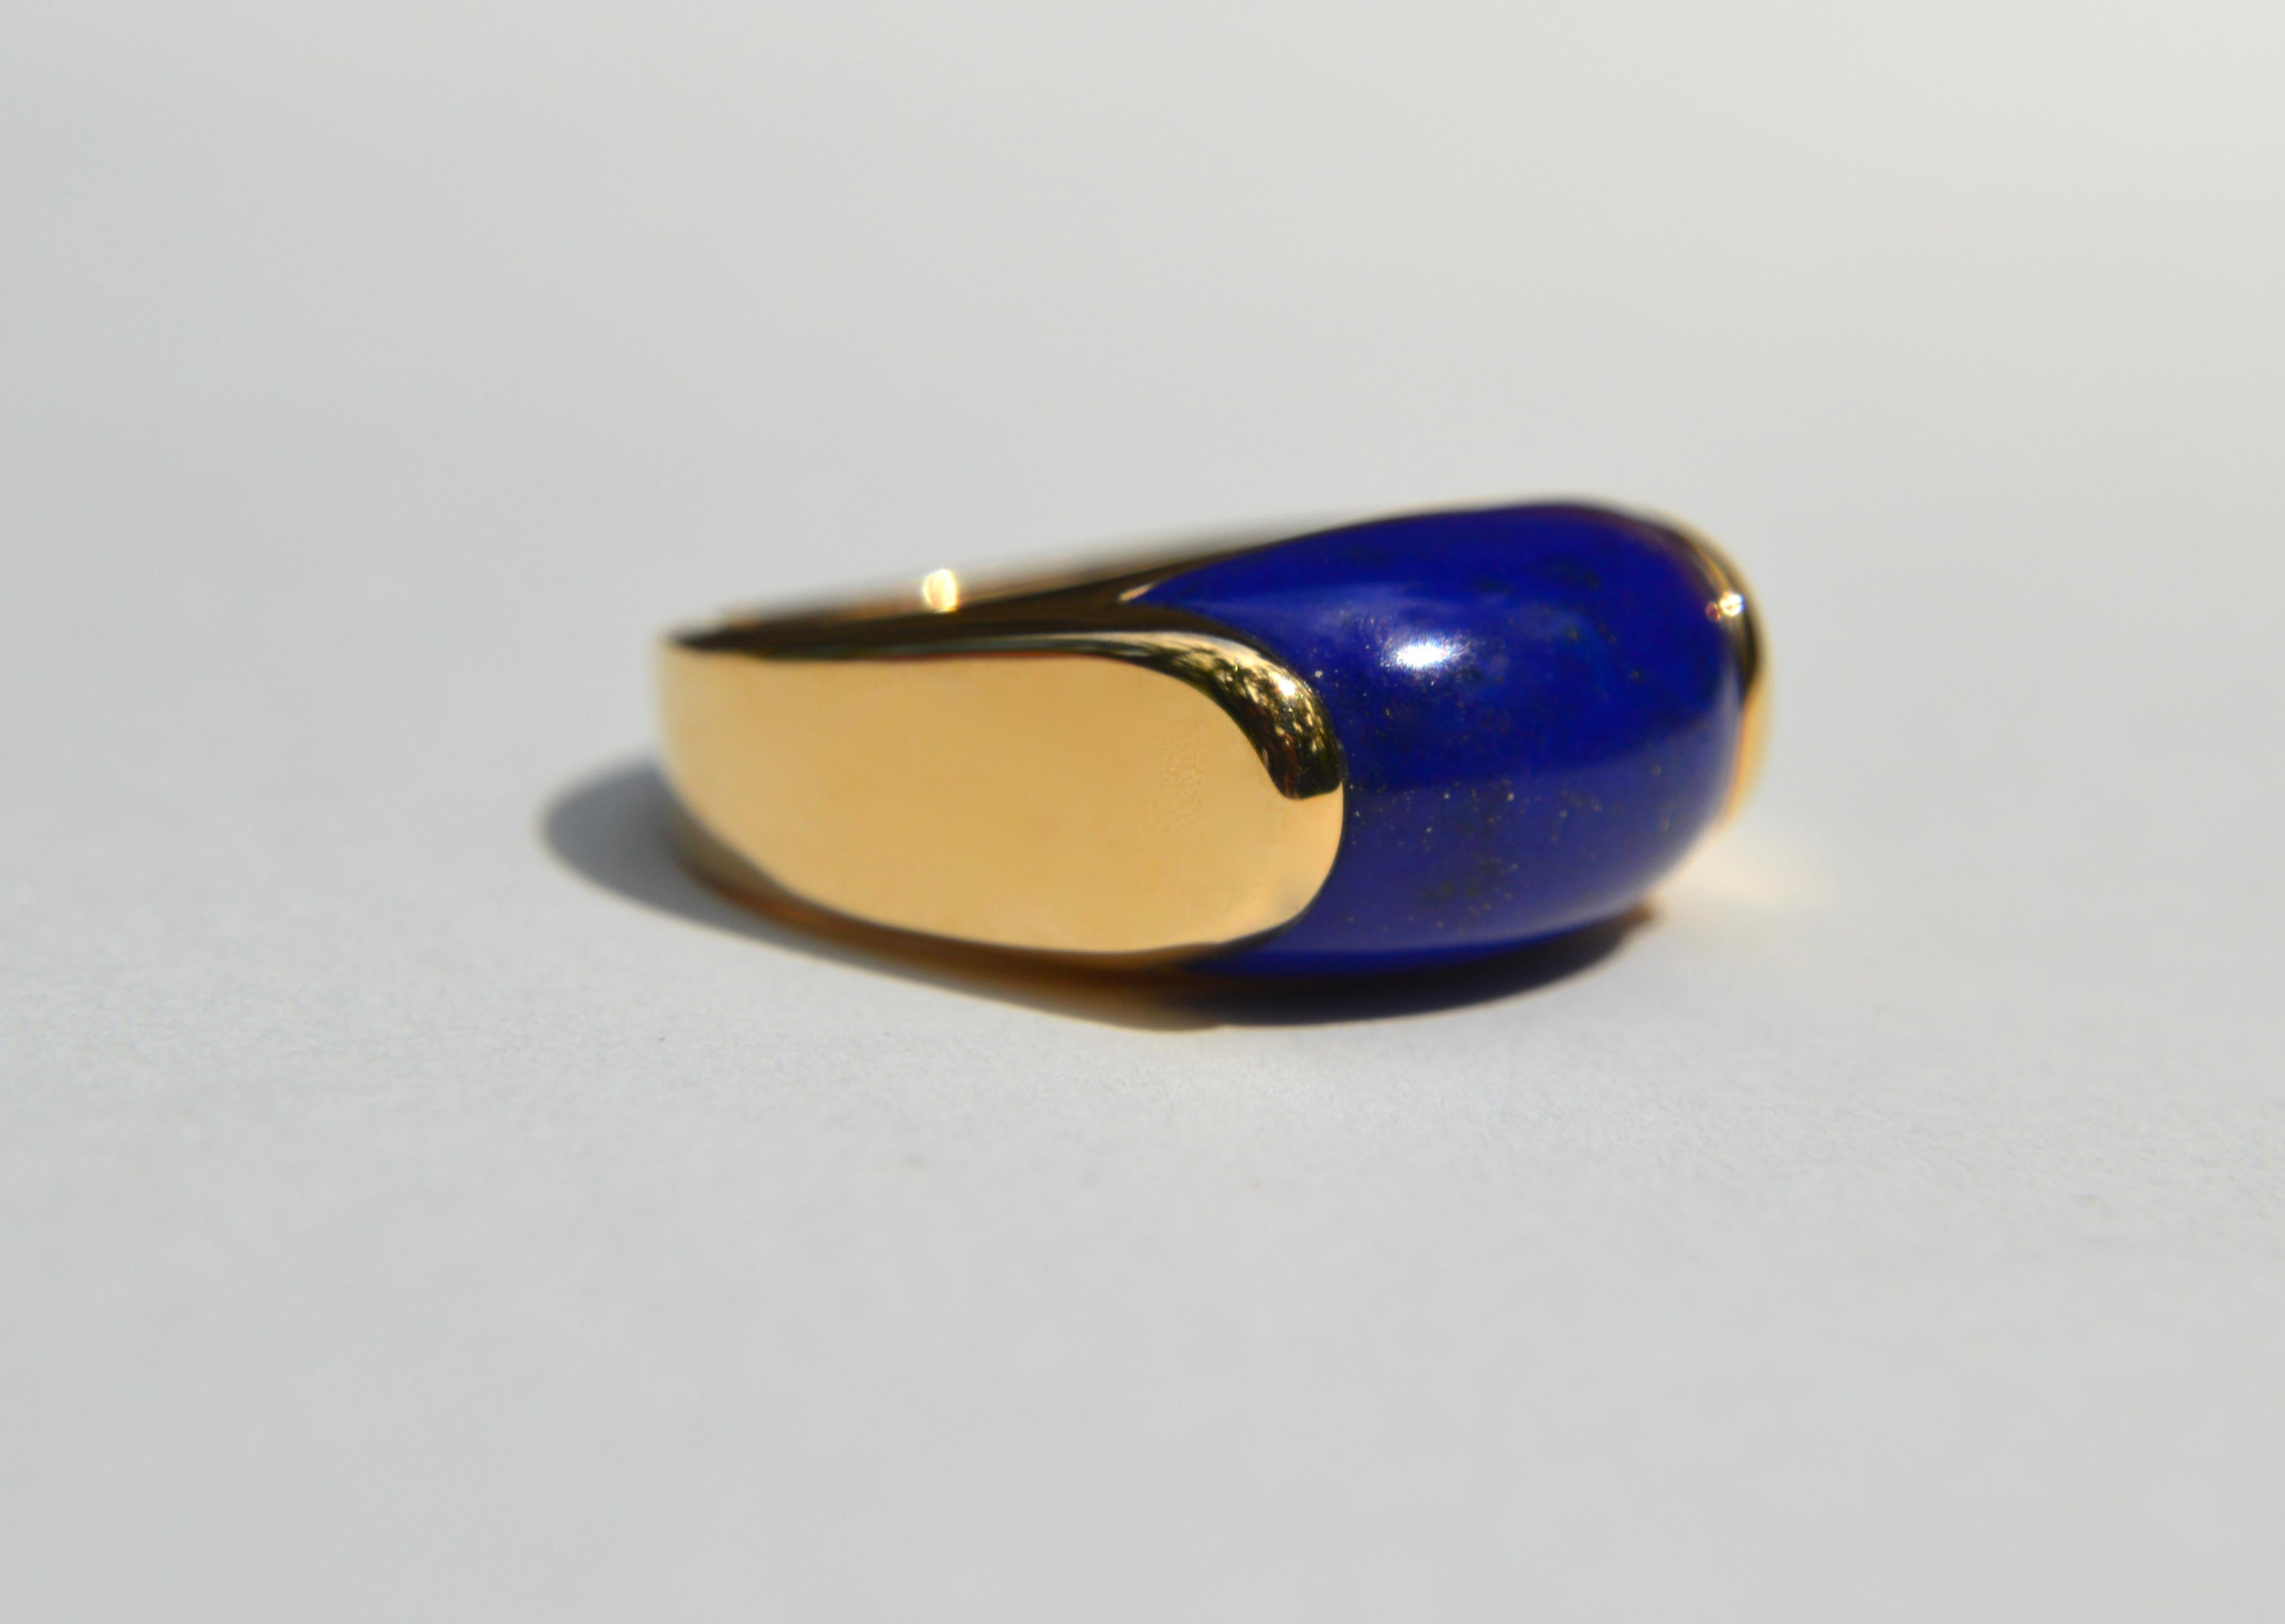 Gorgeous and very rare vintage c1990s Bulgari (Bvlgari) Italy Tronchetto ring in 18K yellow gold with a beautiful golden pyrite flecked lapis lazuli cabochon. In excellent pristine condition, appears unworn.  Size 5.5, resizing not recommended.